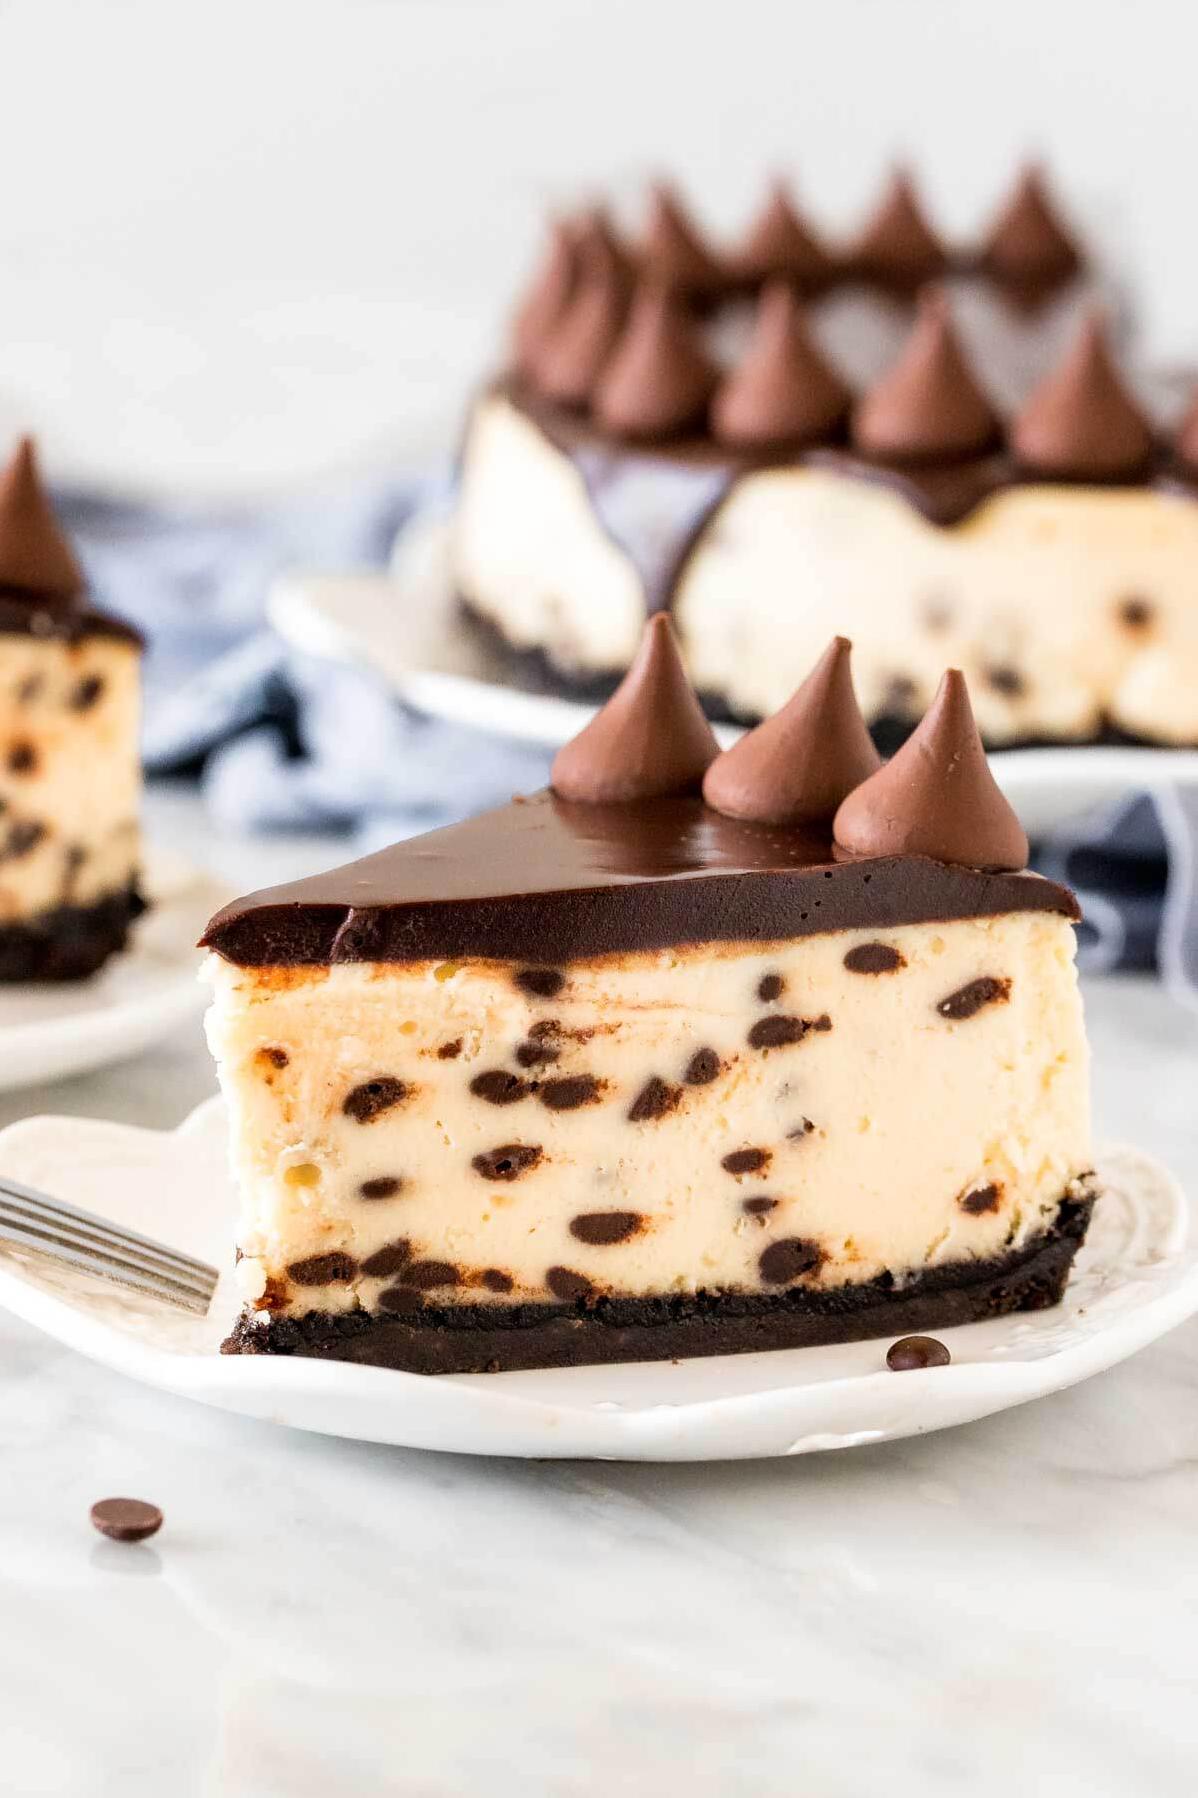  Each bite of creamy cheesecake is studded with crunchy chocolate chips